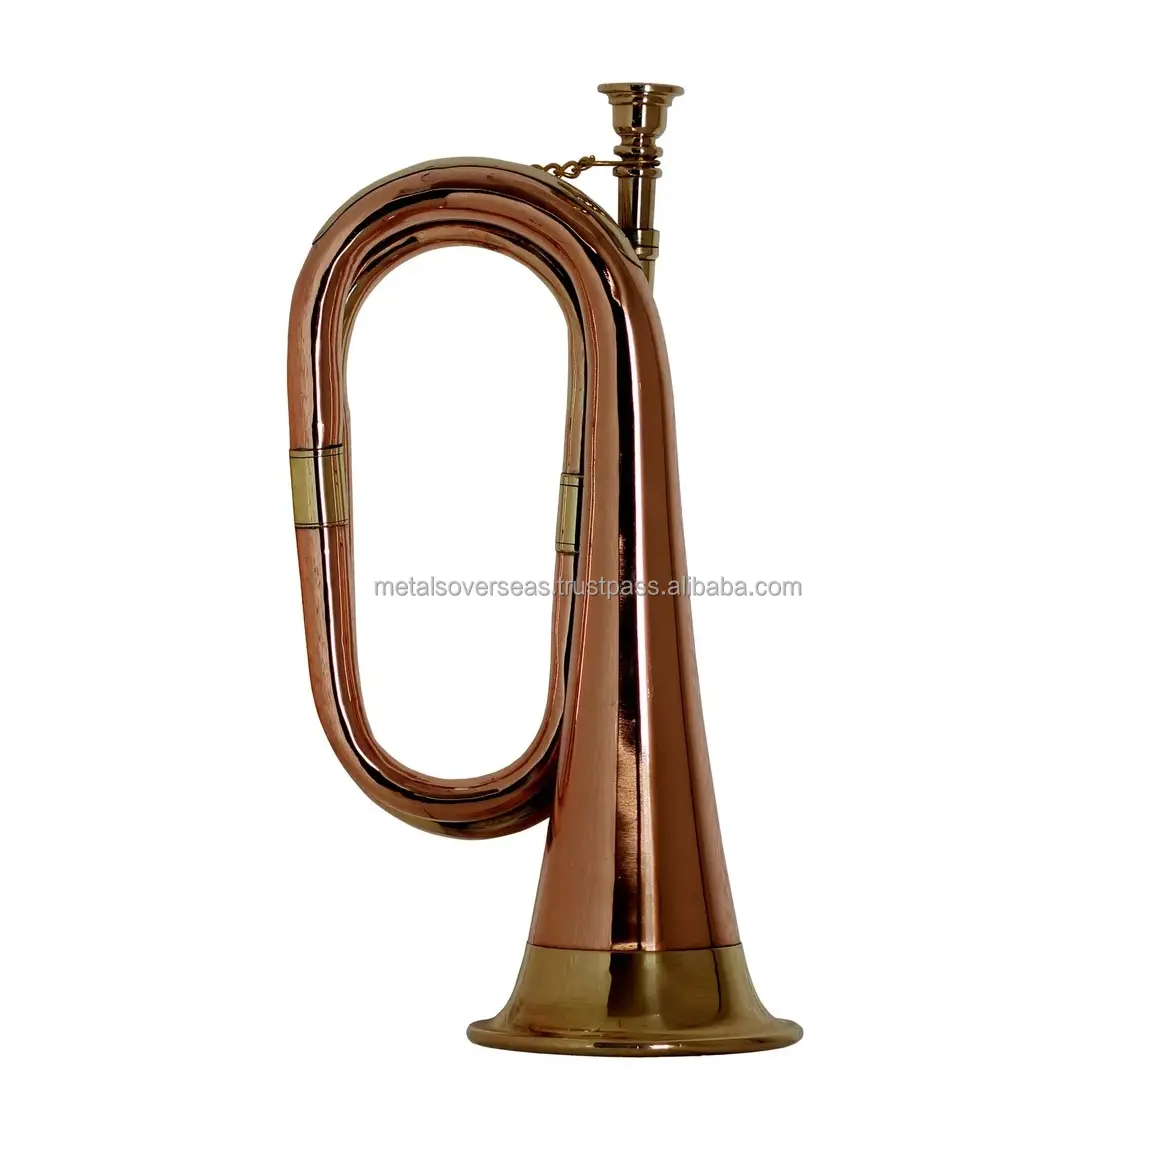 Hot Sale Brass And Copper Blowing Bugle Attack War Command Signal Horn for School Students Practice Indian Musical Brass Horn